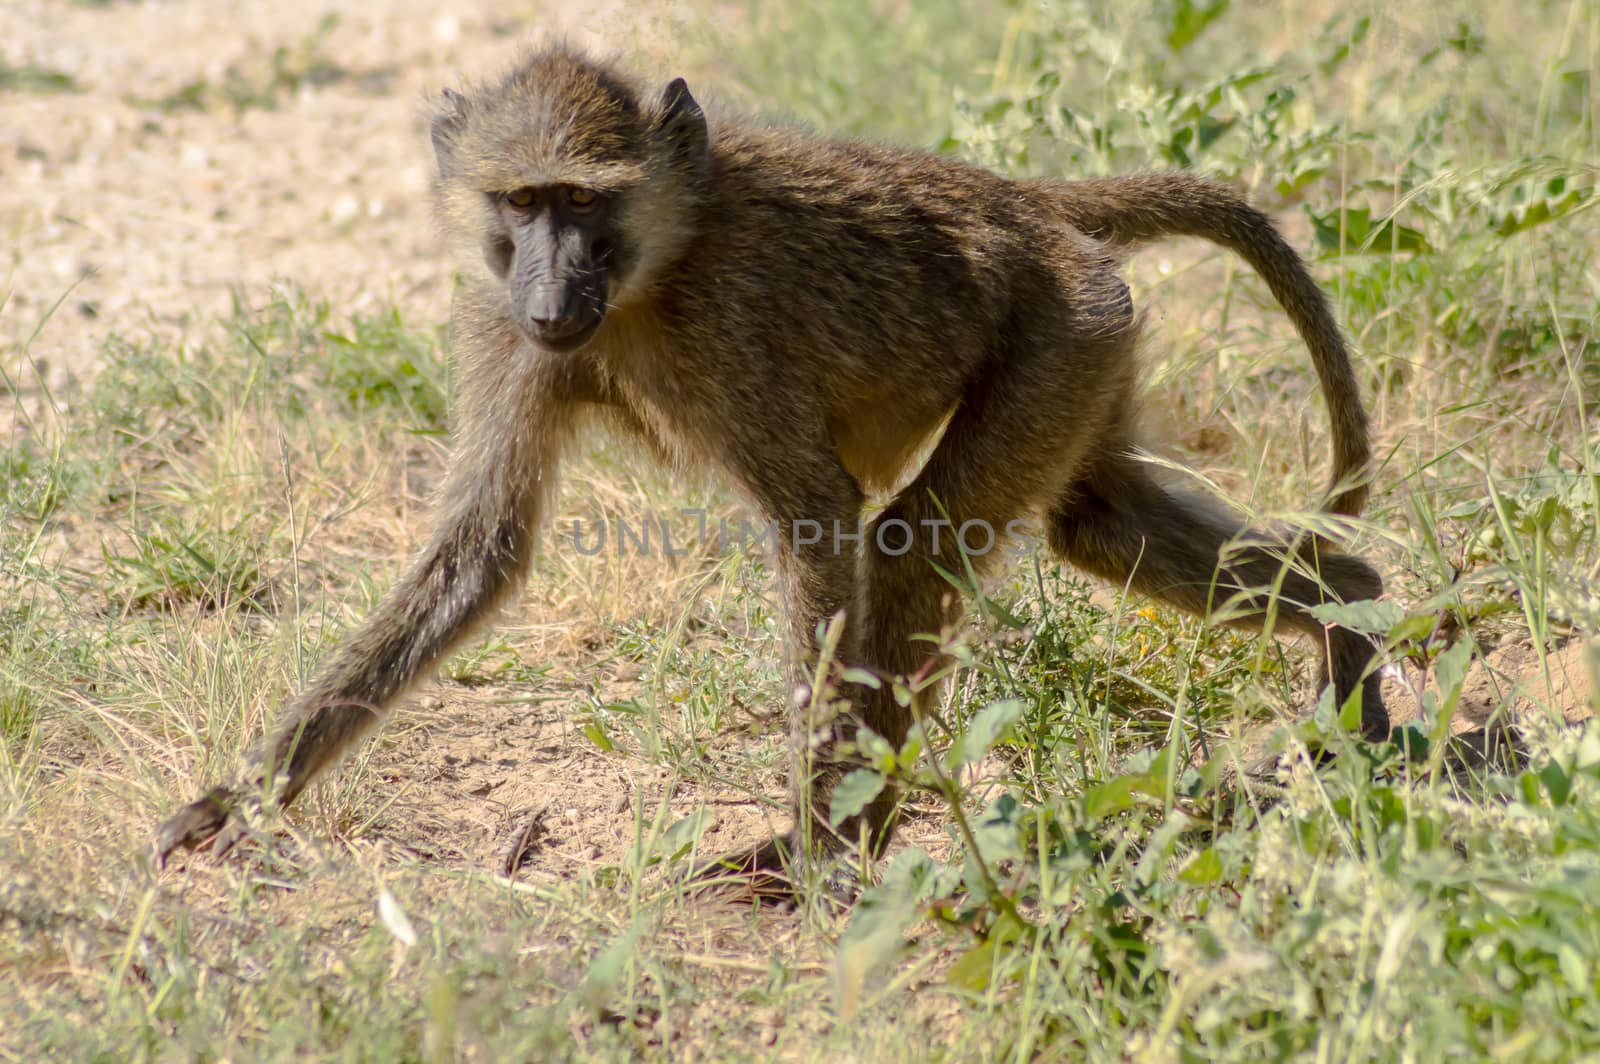 Vervet monkey in the natural habitat of the African savannah  by Philou1000